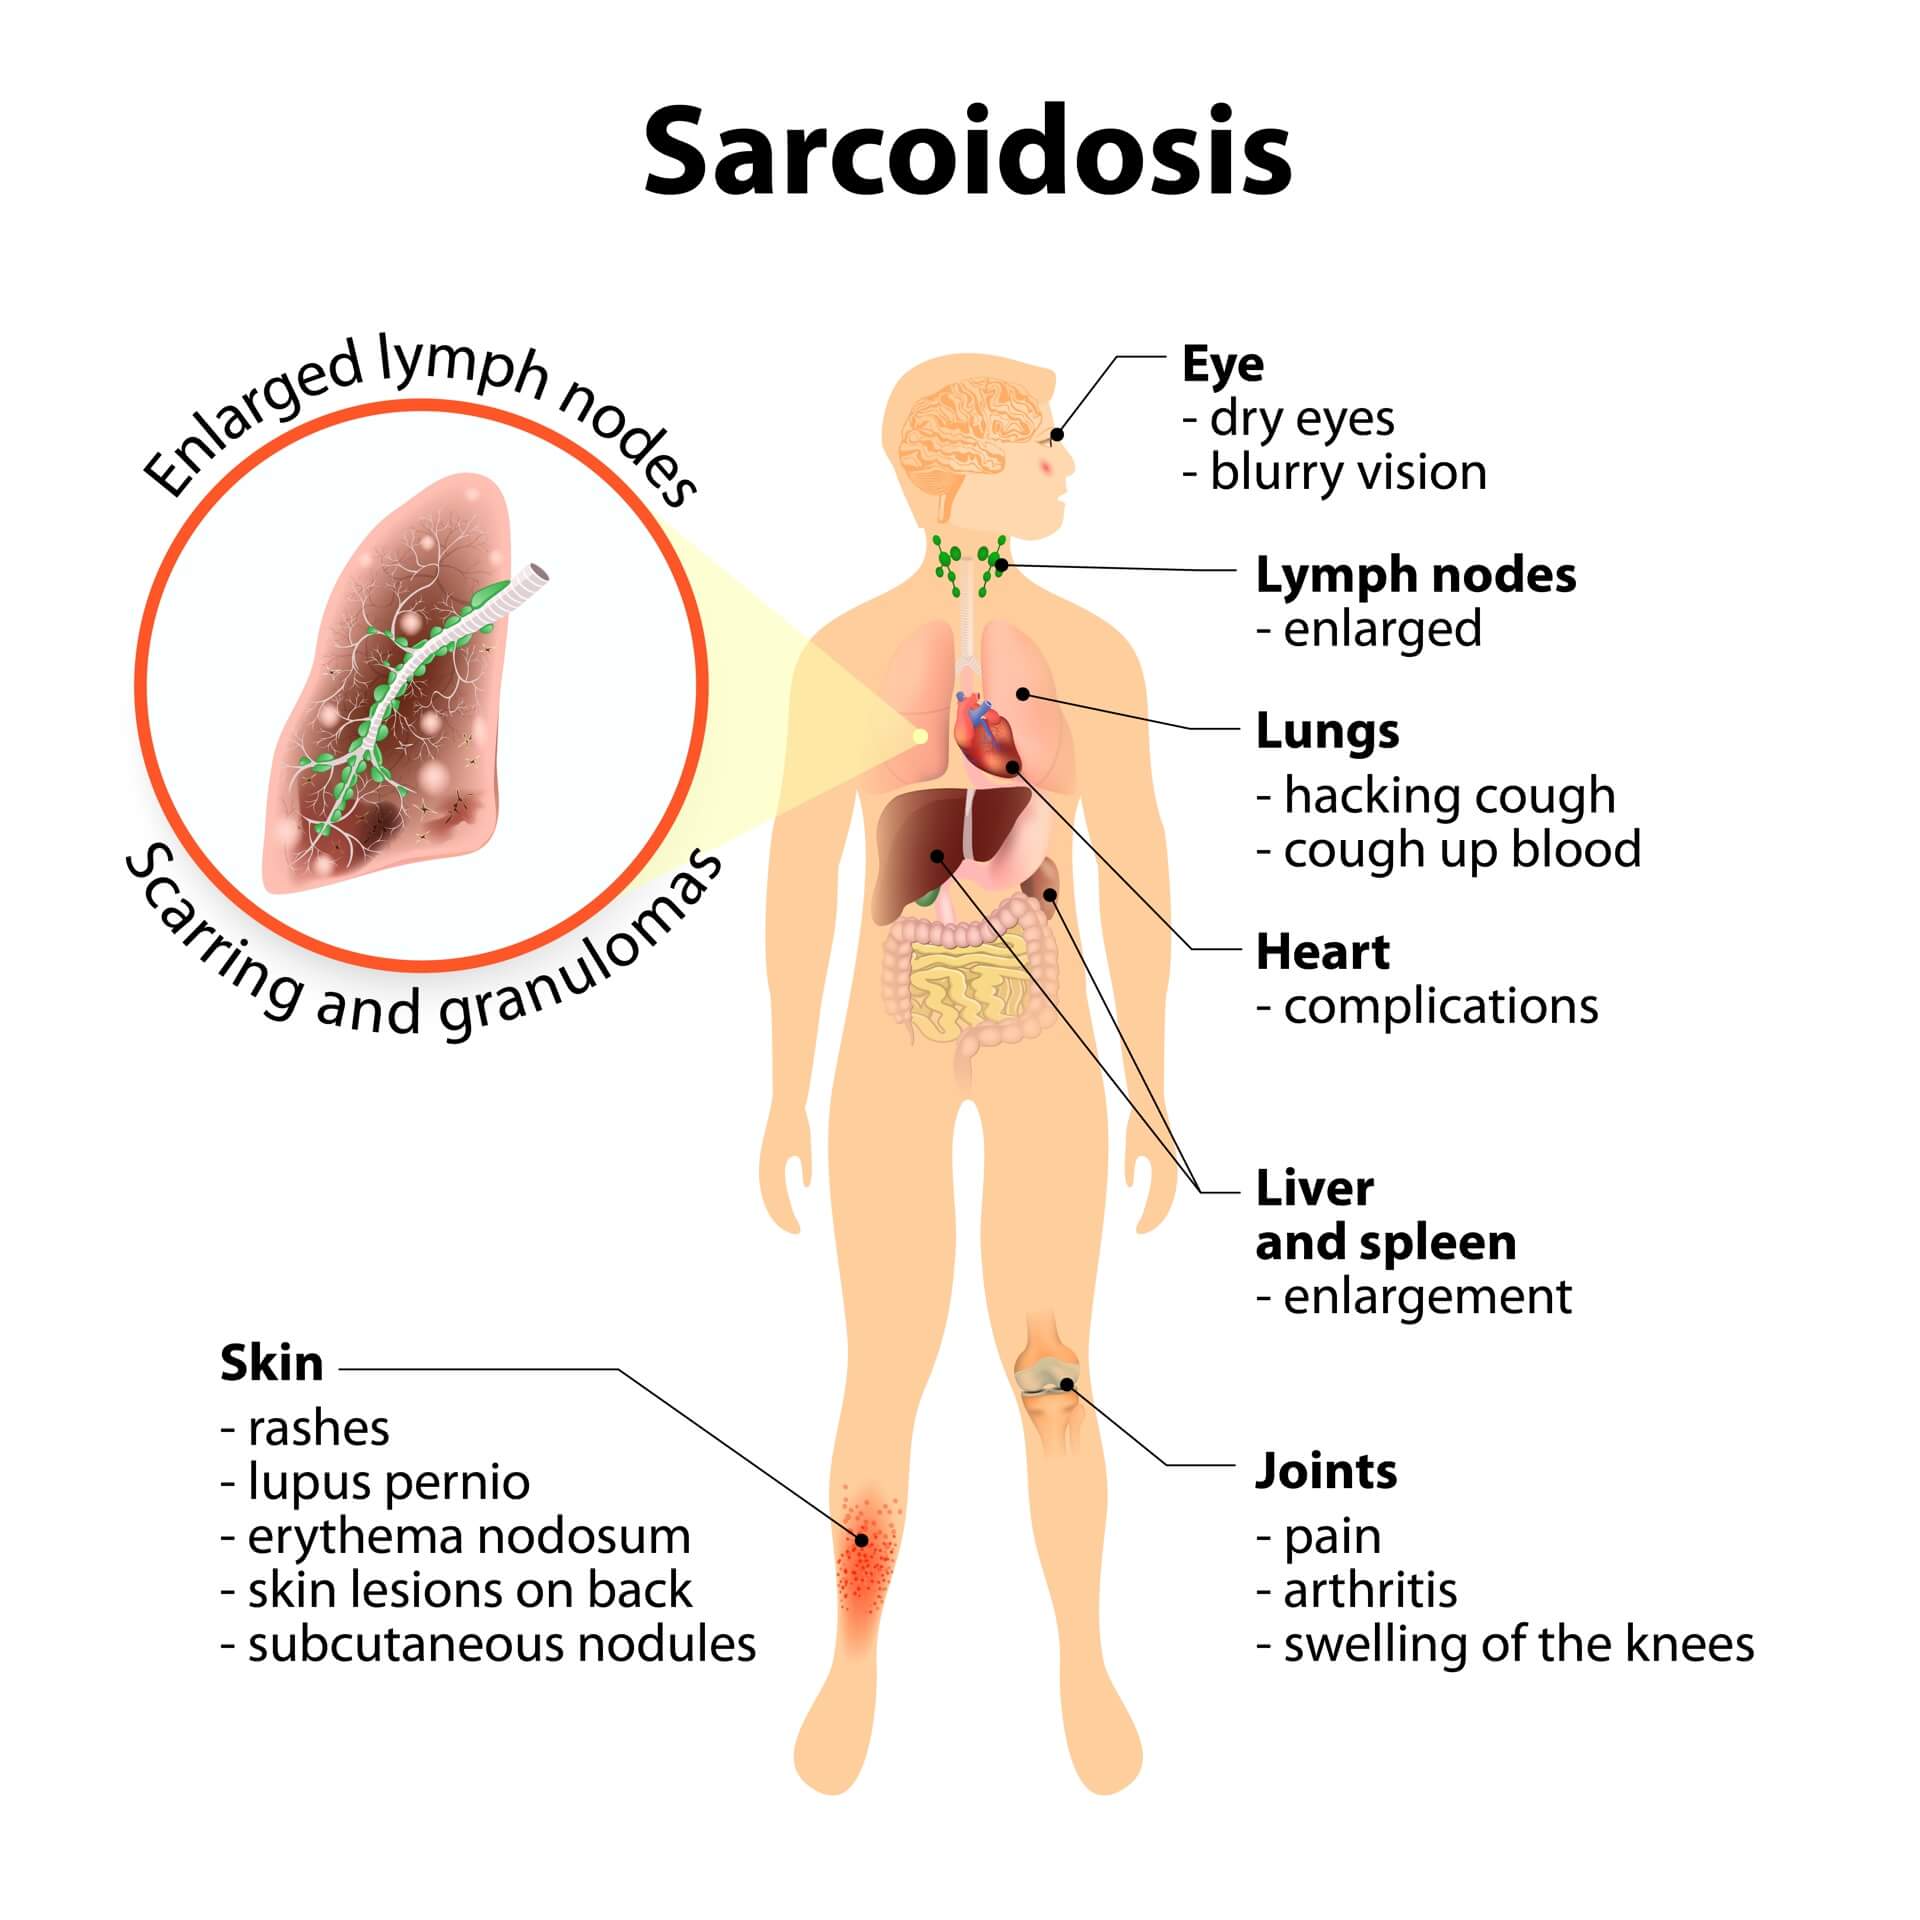 Sarcoidosis: Autoimmune Disease: Signs & Symptoms Your Body Is Attacking Itself + Treatments | Dr. Jiwani's Naturopathic Nuggets Blog